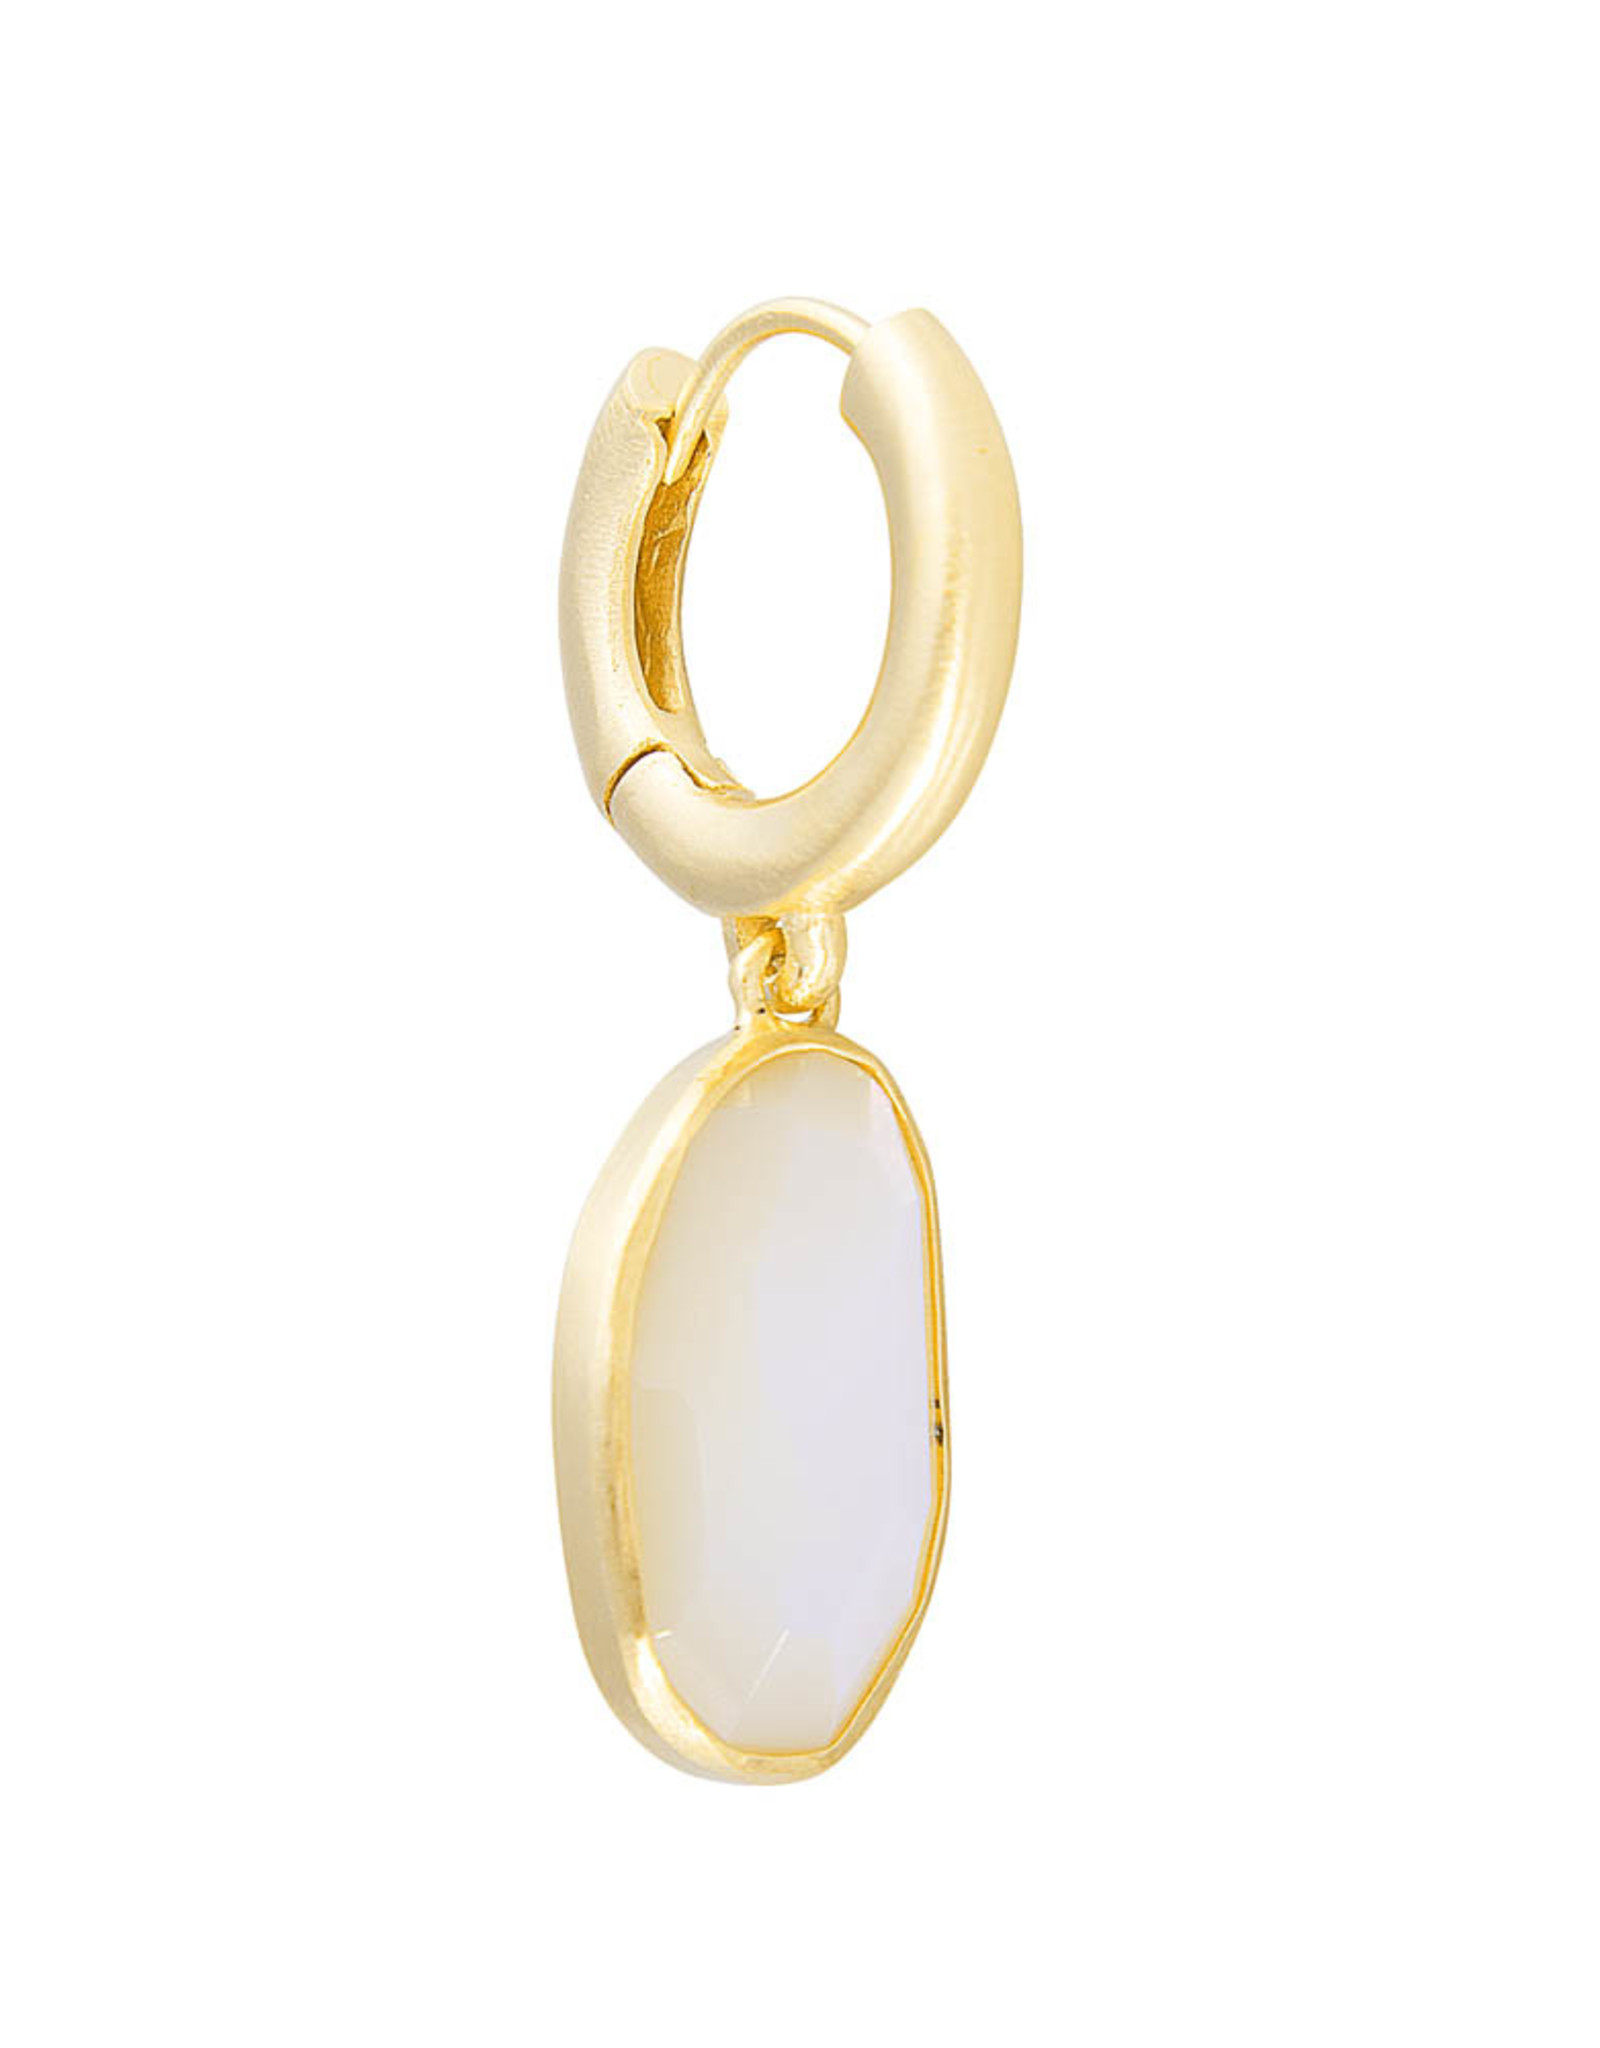 FAIRLEY FREE FORM MOTHER OF PEARL HOOPS